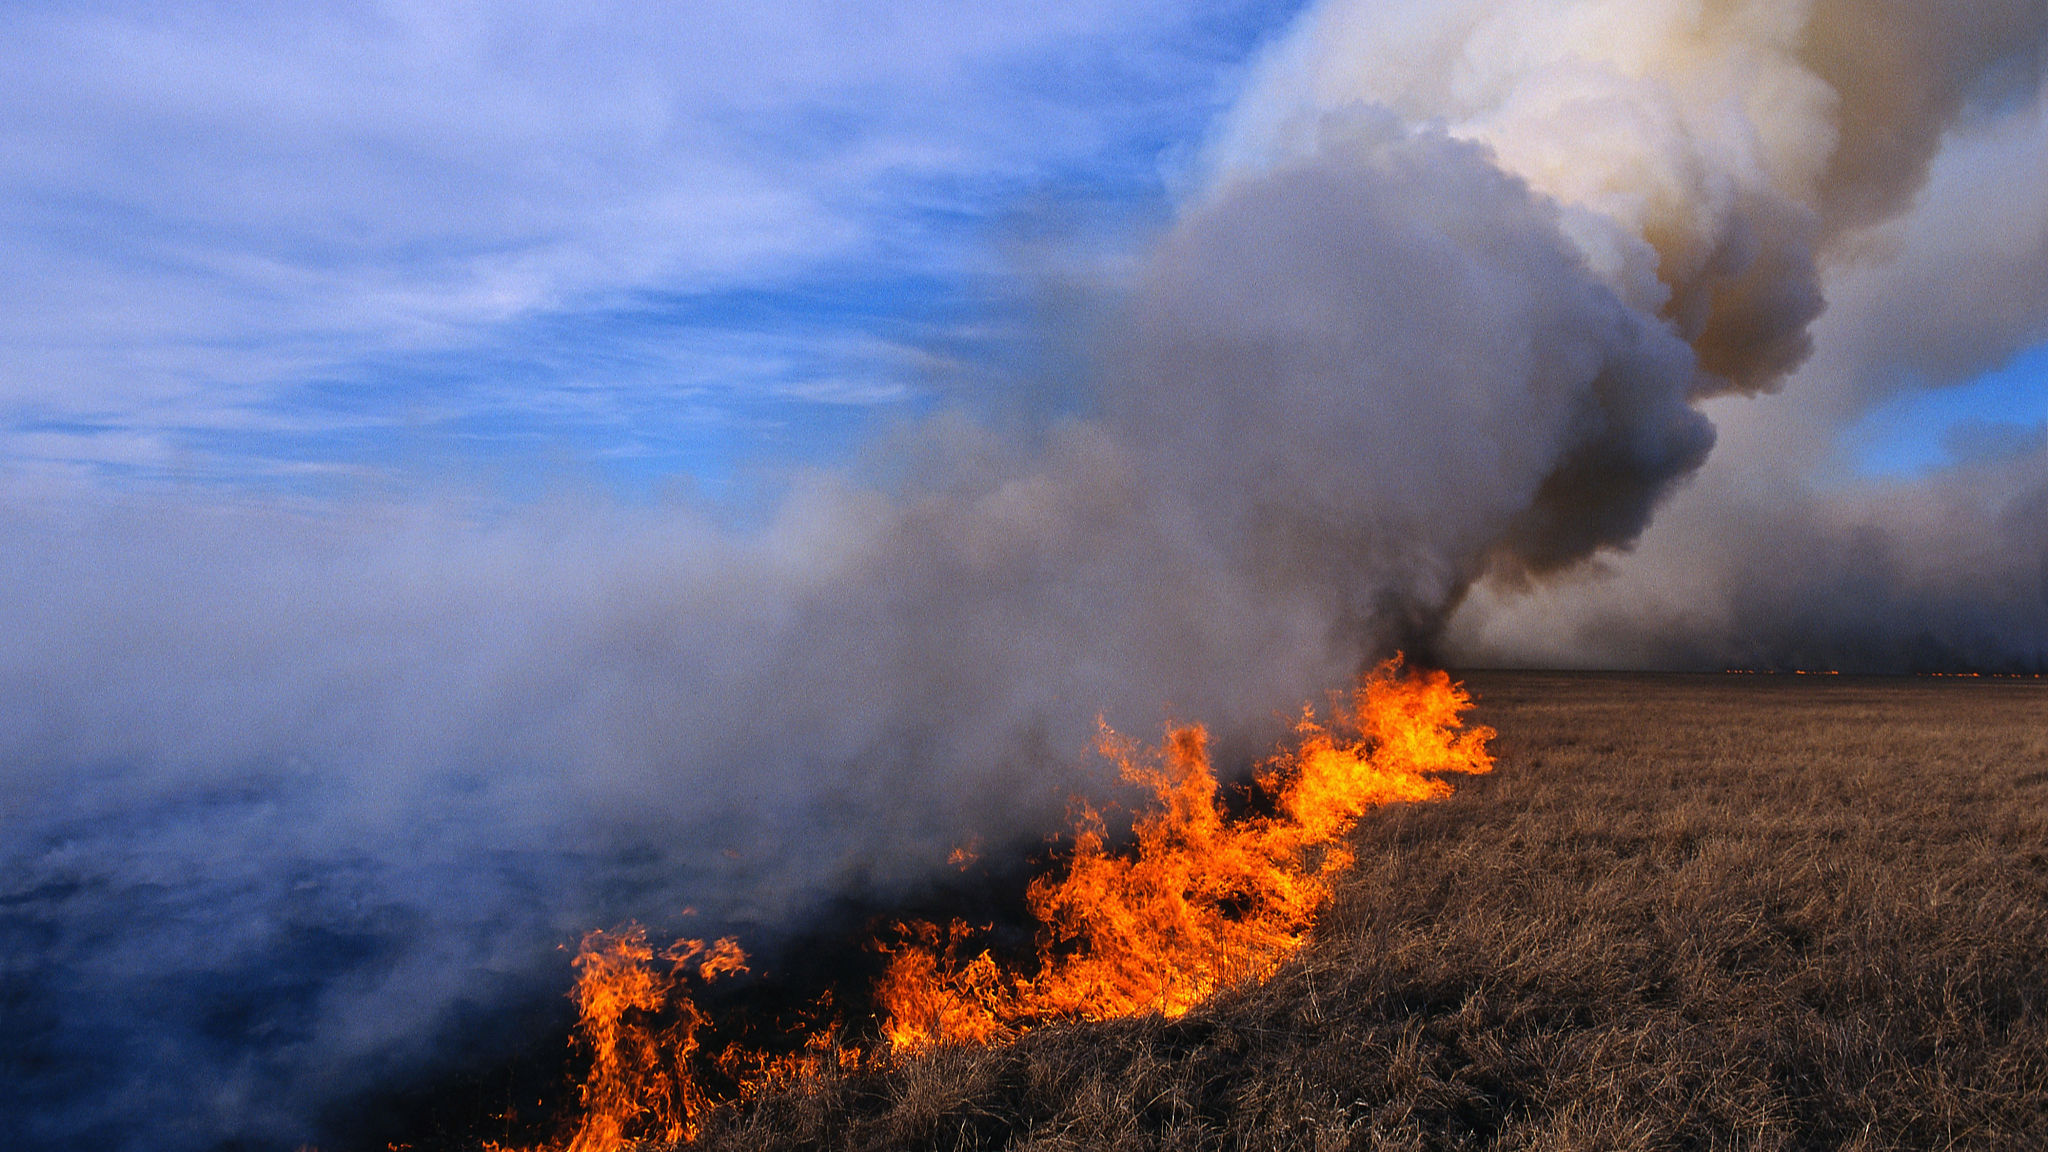 A total of 90 forest and steppe fires have been reported across Mongolia since the beginning of this year, according to the country's National Emergency Management Agency (NEMA). /CFP